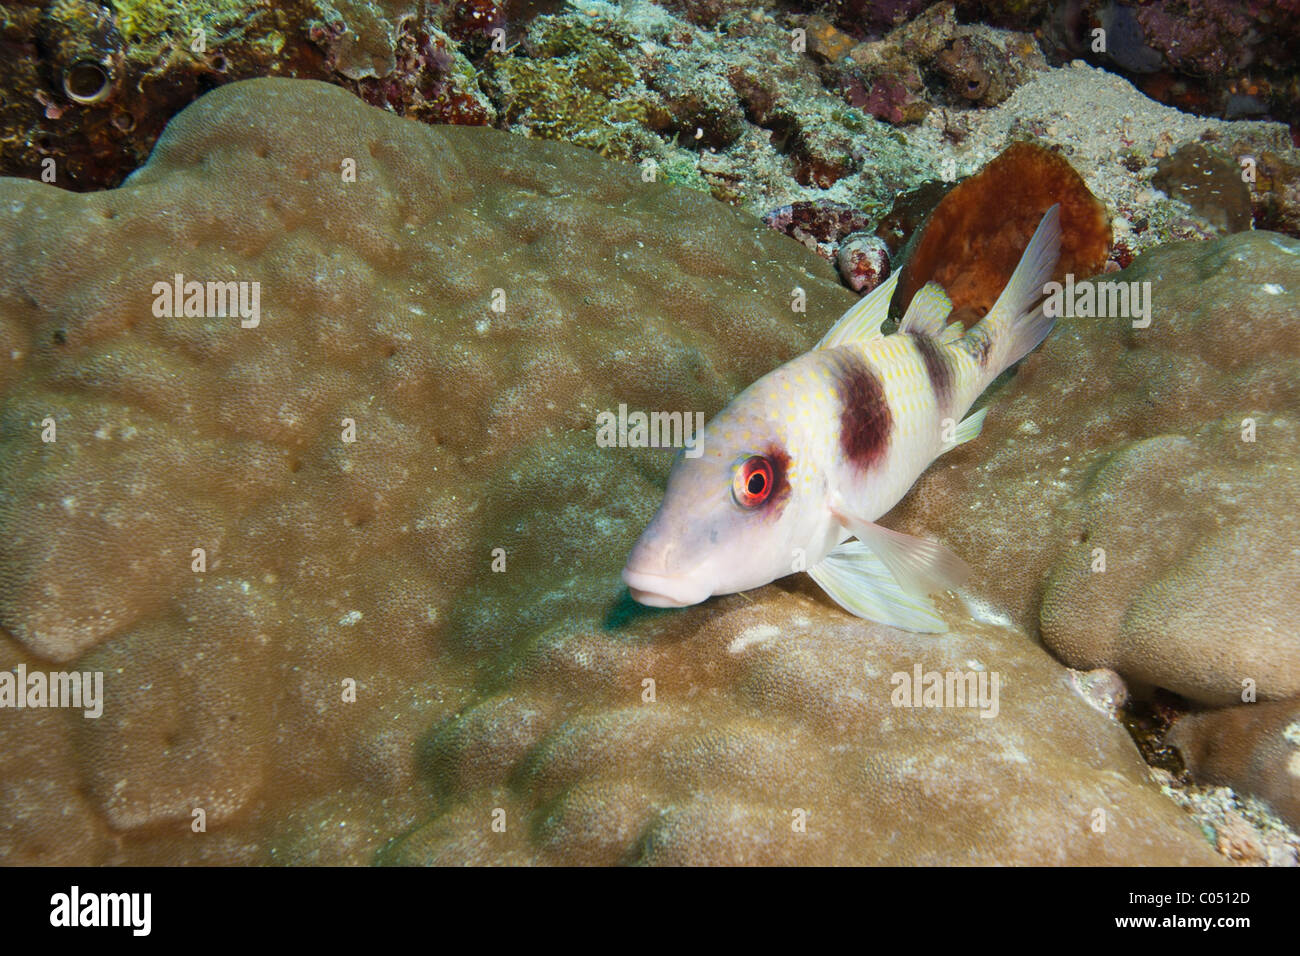 Doublebar Goatfish (Parupeneus crassilabris) on a tropical coral reef off Bunaken Island in North Sulawesi, Indonesia. Stock Photo